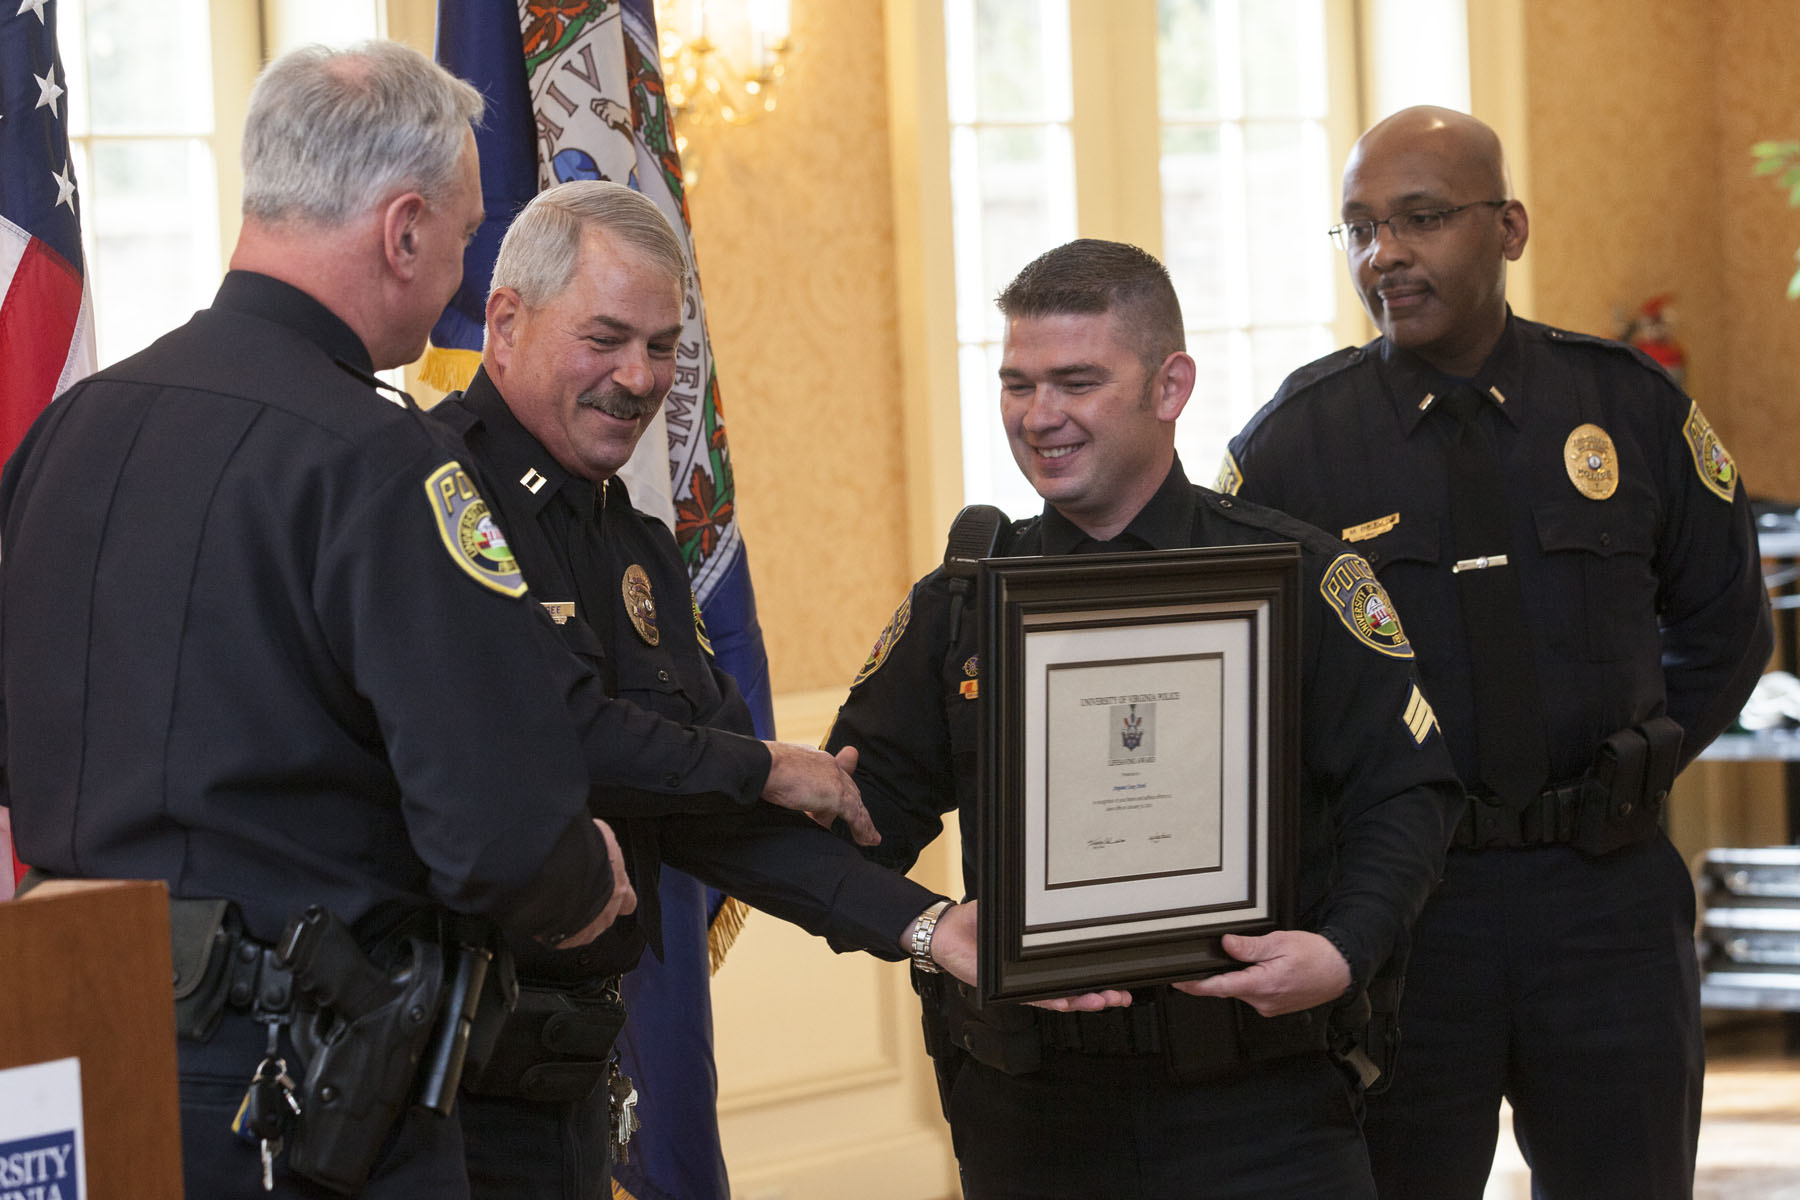 Sgt. Casey Accord (center) shakes fellow officers hands while receiving an award